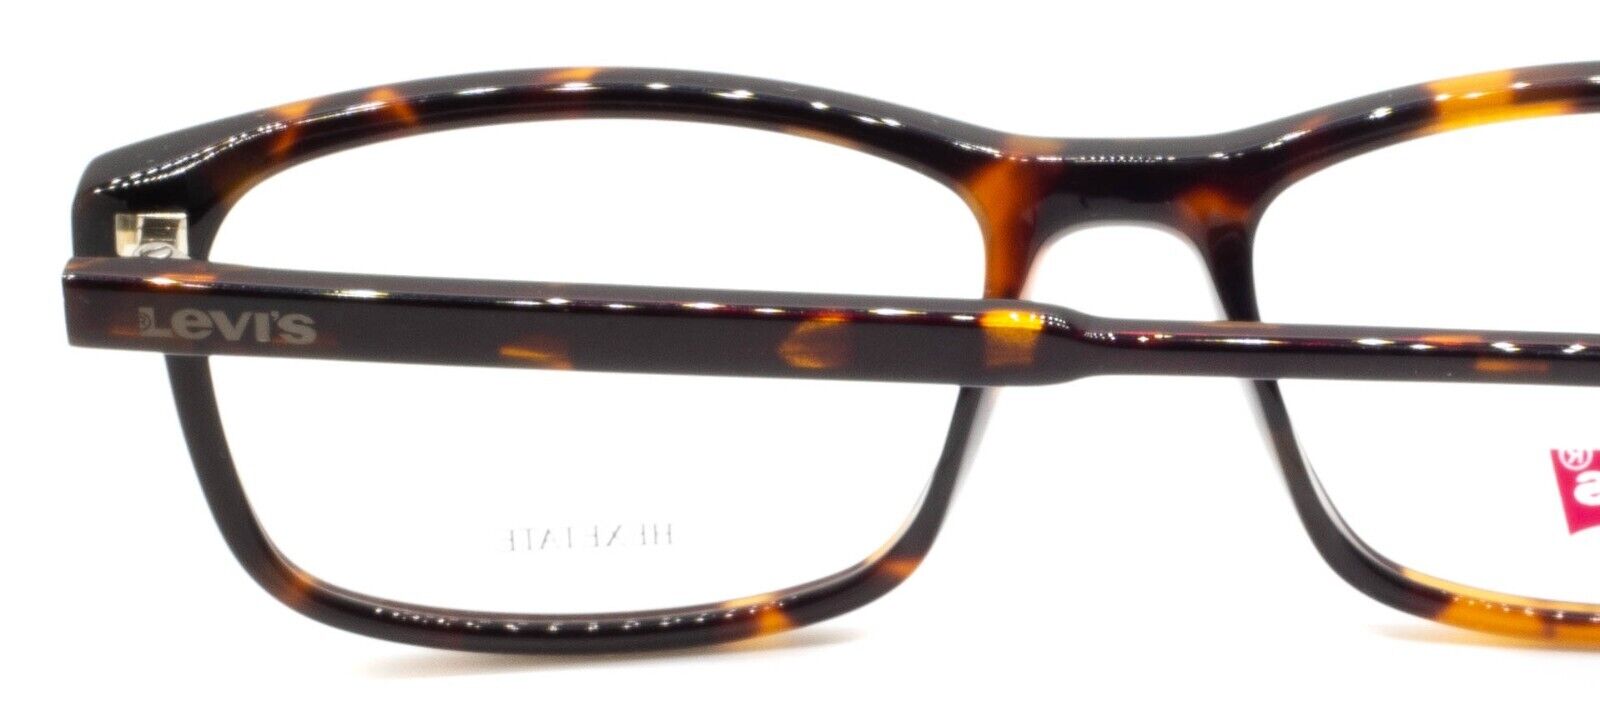 Levis Lv 1015 Eyeglasses  FREE Shipping -  - SOLD OUT